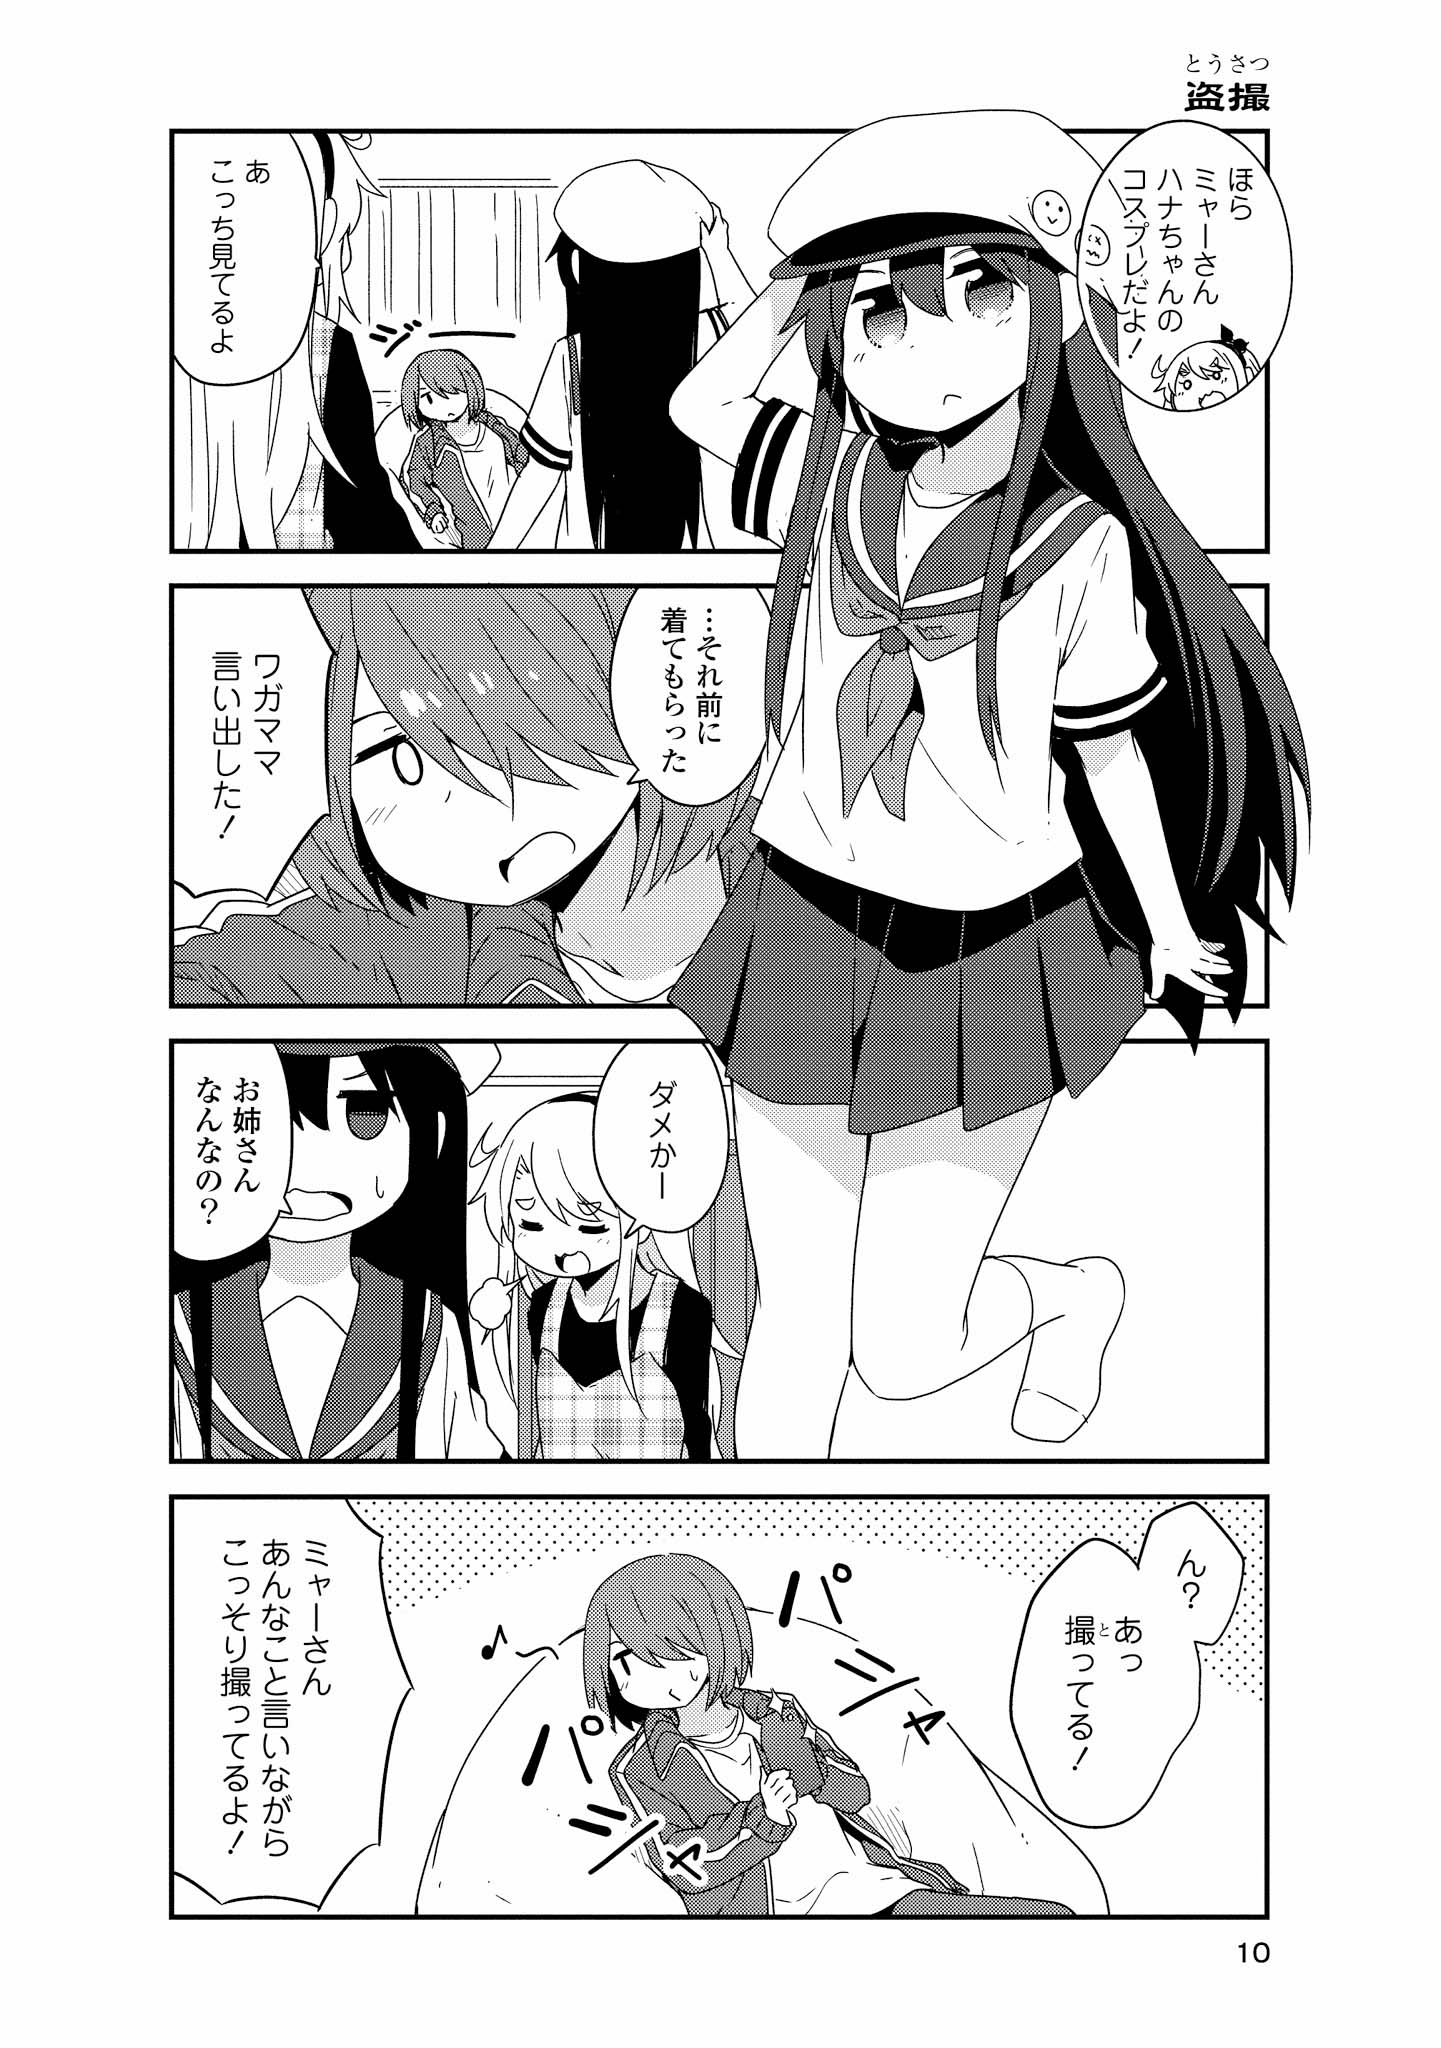 Wataten! An Angel Flew Down to Me 私に天使が舞い降りた！ 第37話 - Page 6